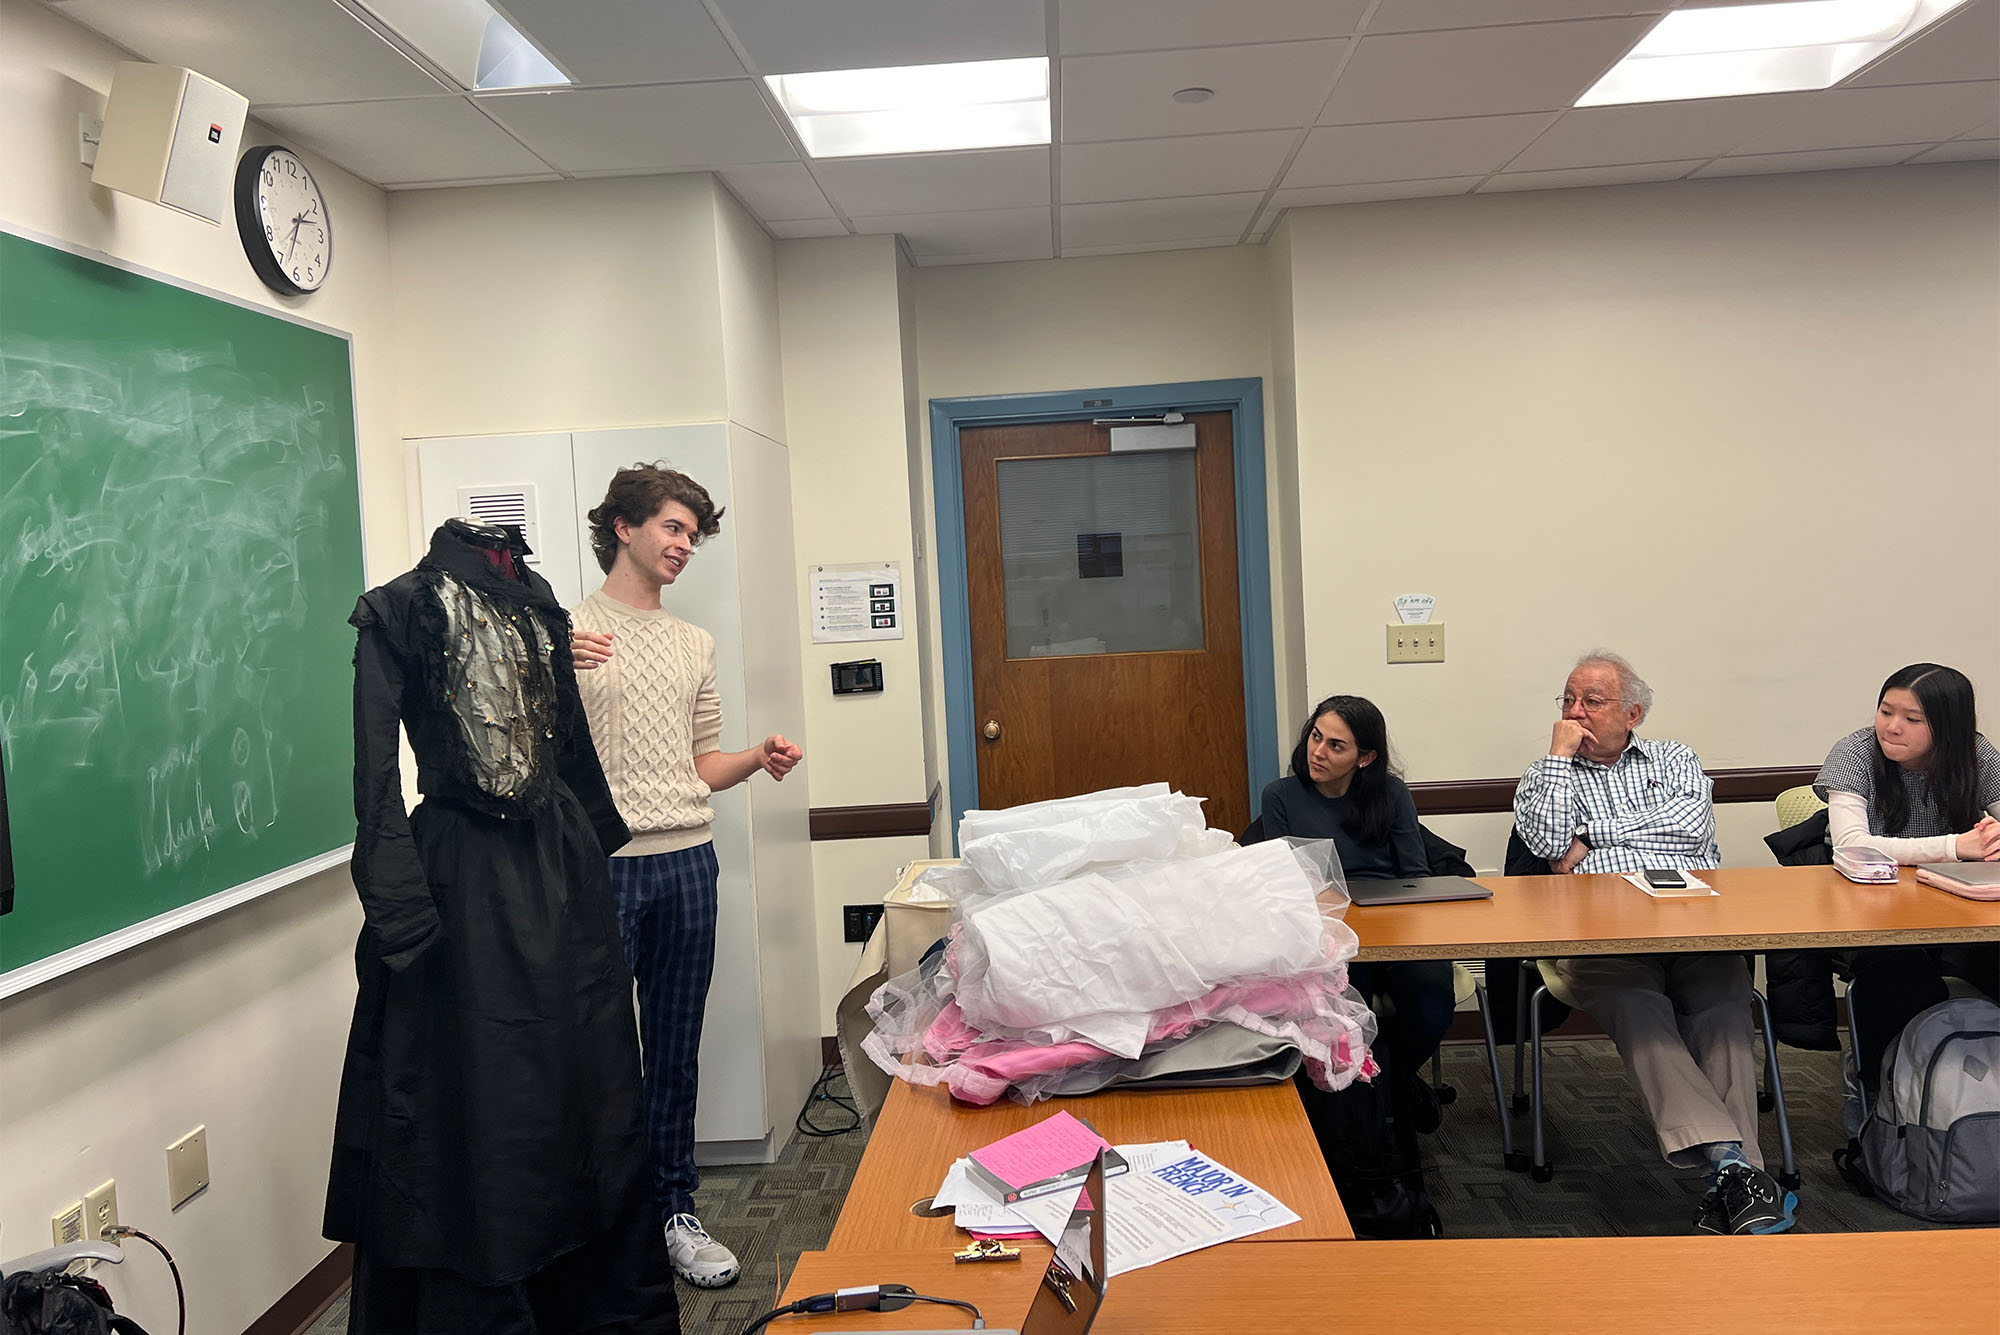 Photo: Visiting the CAS class Cultural Histories of the 19th Century, Hutton brought along some original antique pieces of clothing from his personal collection, i this Victorian mourning dress among them. Photo by Rachel Mesch